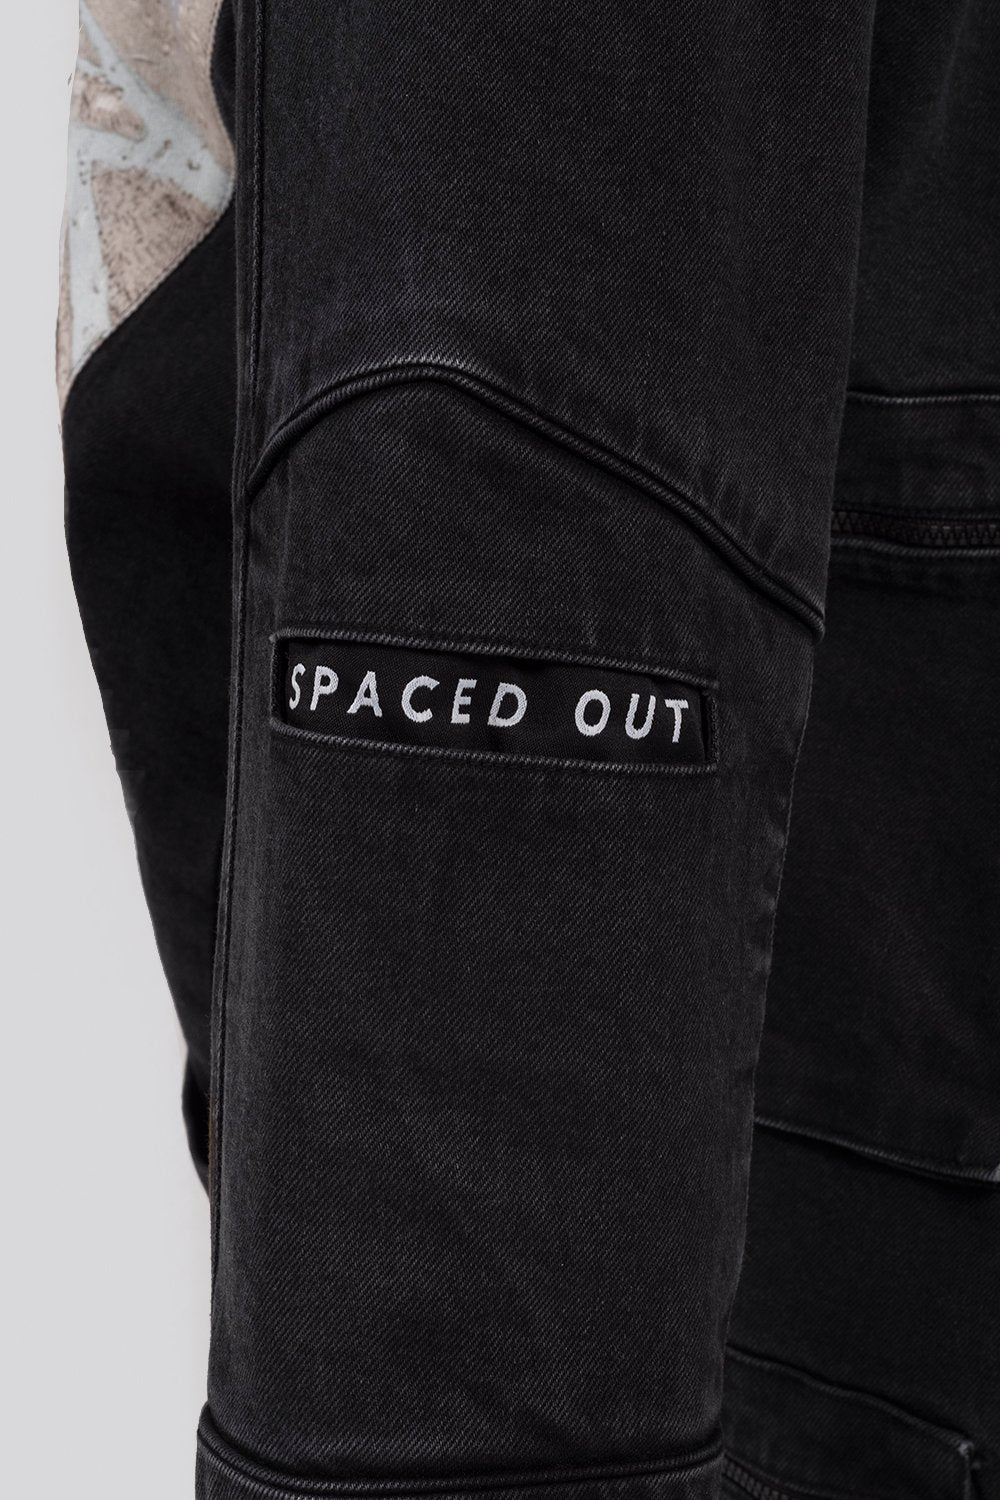 Black Unisex Denim Jacket with multiple functional pockets and art print panel on the back.  Designed in Madras, Made in India  | BISKIT UNISEX CLOTHING LABEL